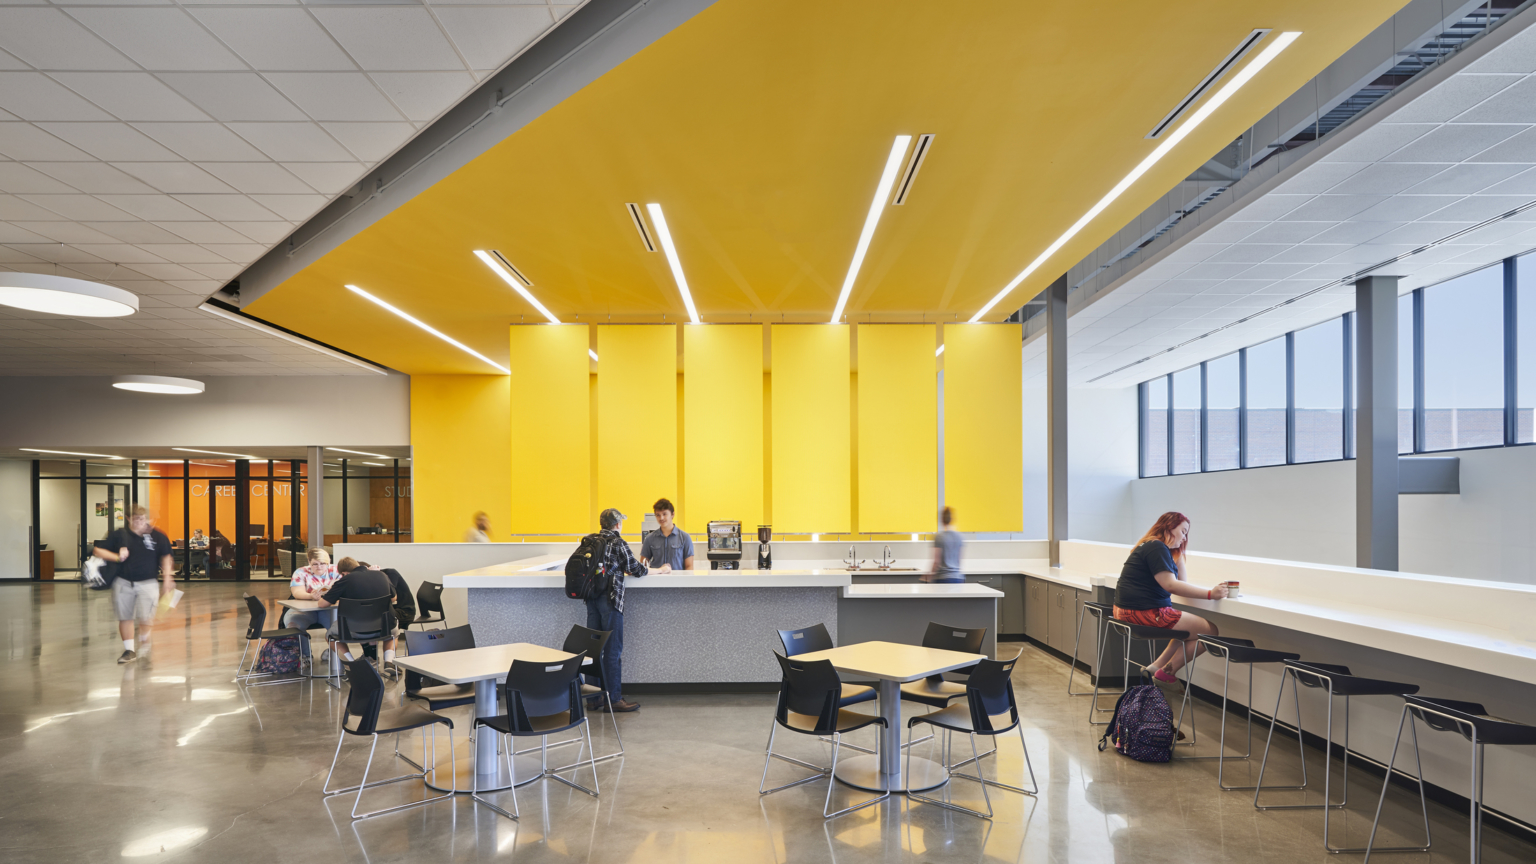 21st century learning environment activating community space for students with study counter and yellow design feature covering the wall and ceiling at salina south high school